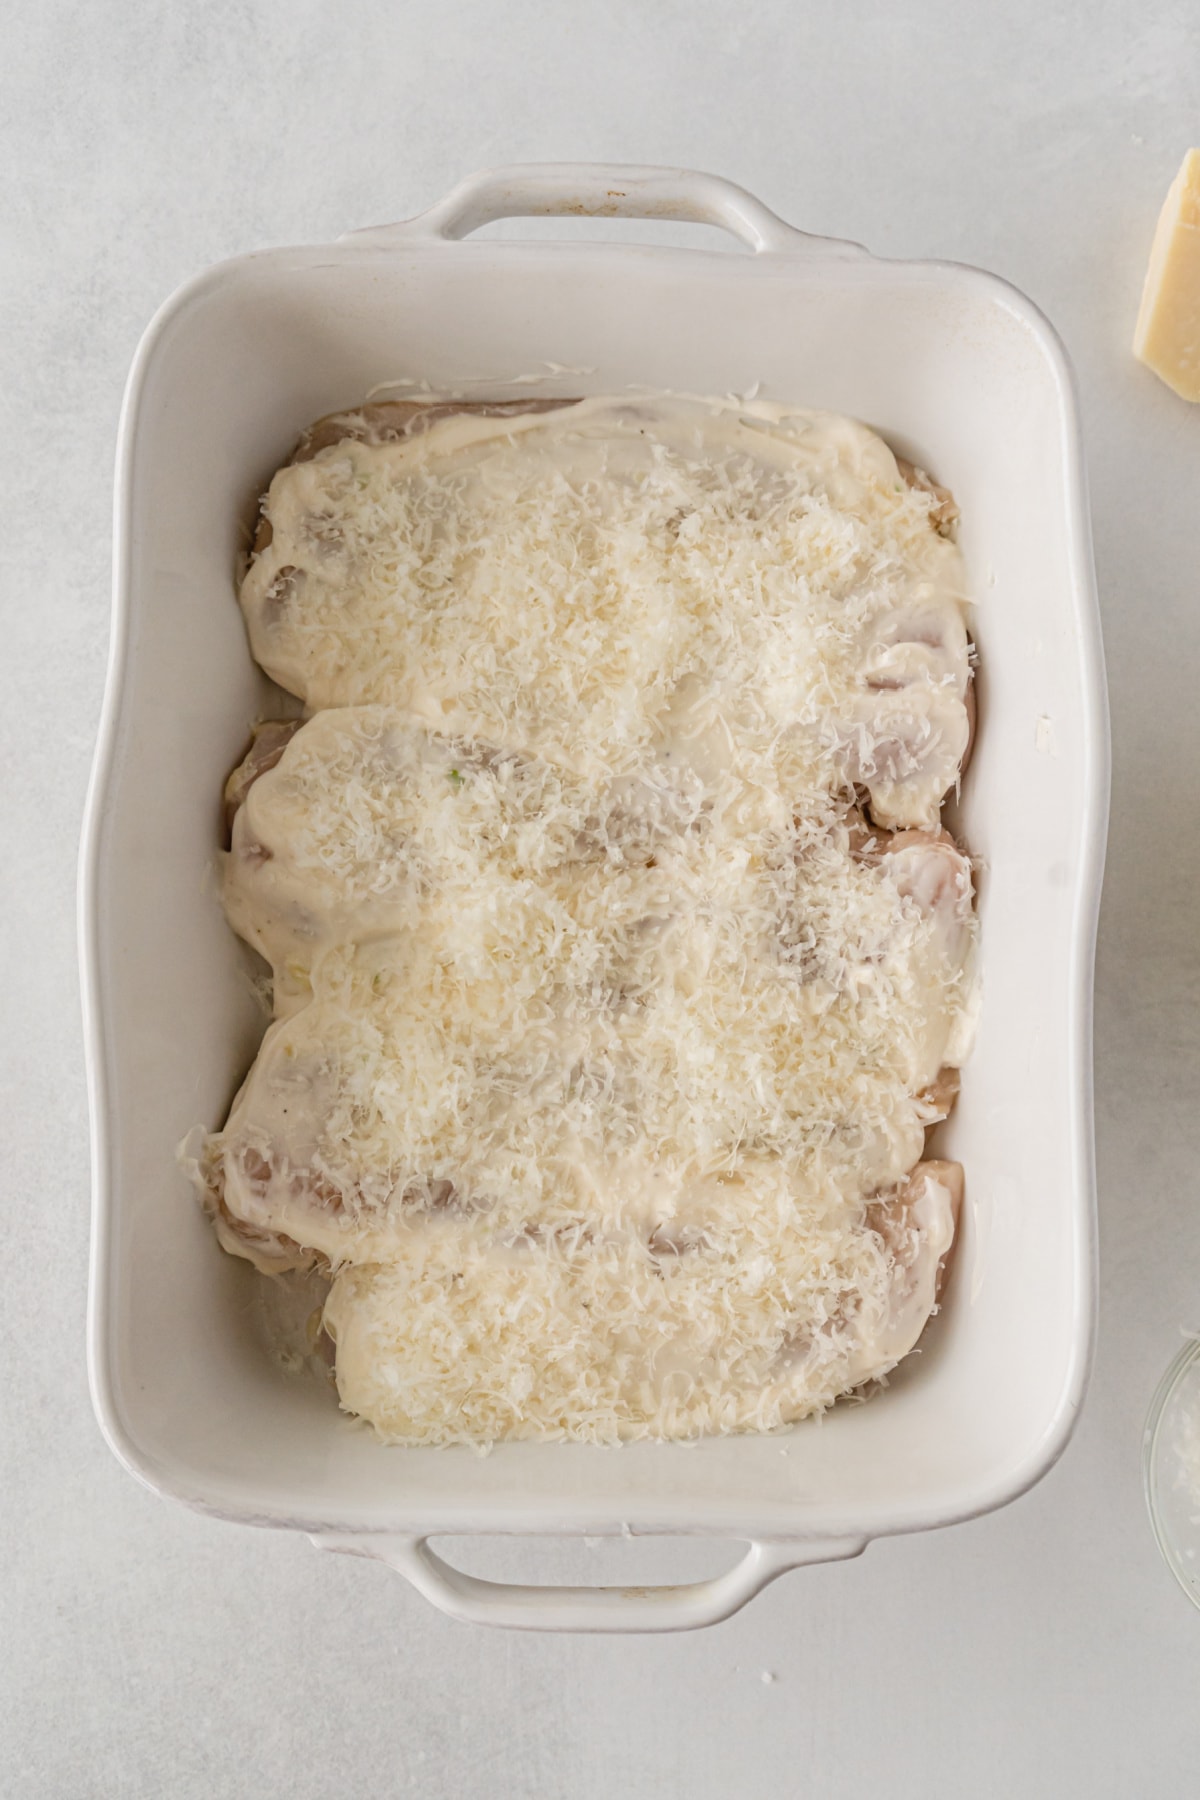 Parmesan Crusted Chicken With Mayo in baking pan